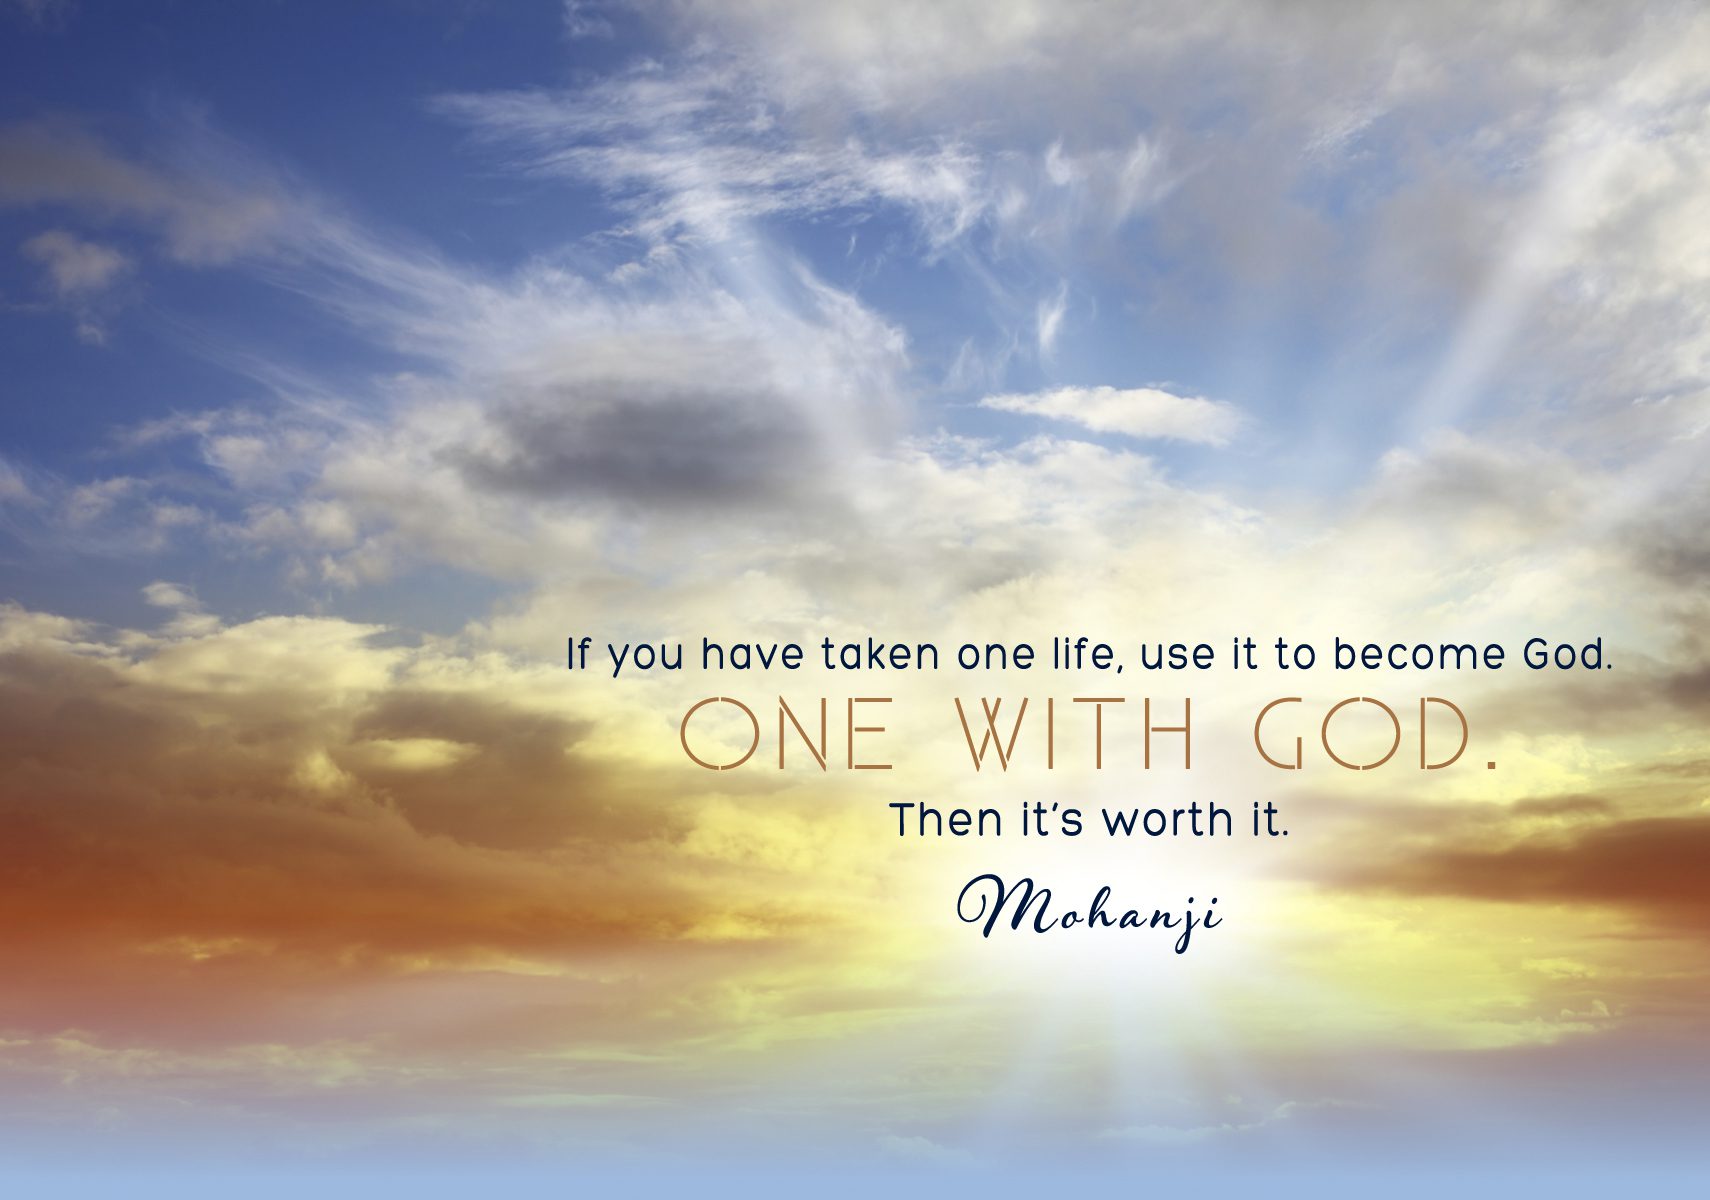 Mohanji quote - If you  have taken one life, use it to become God